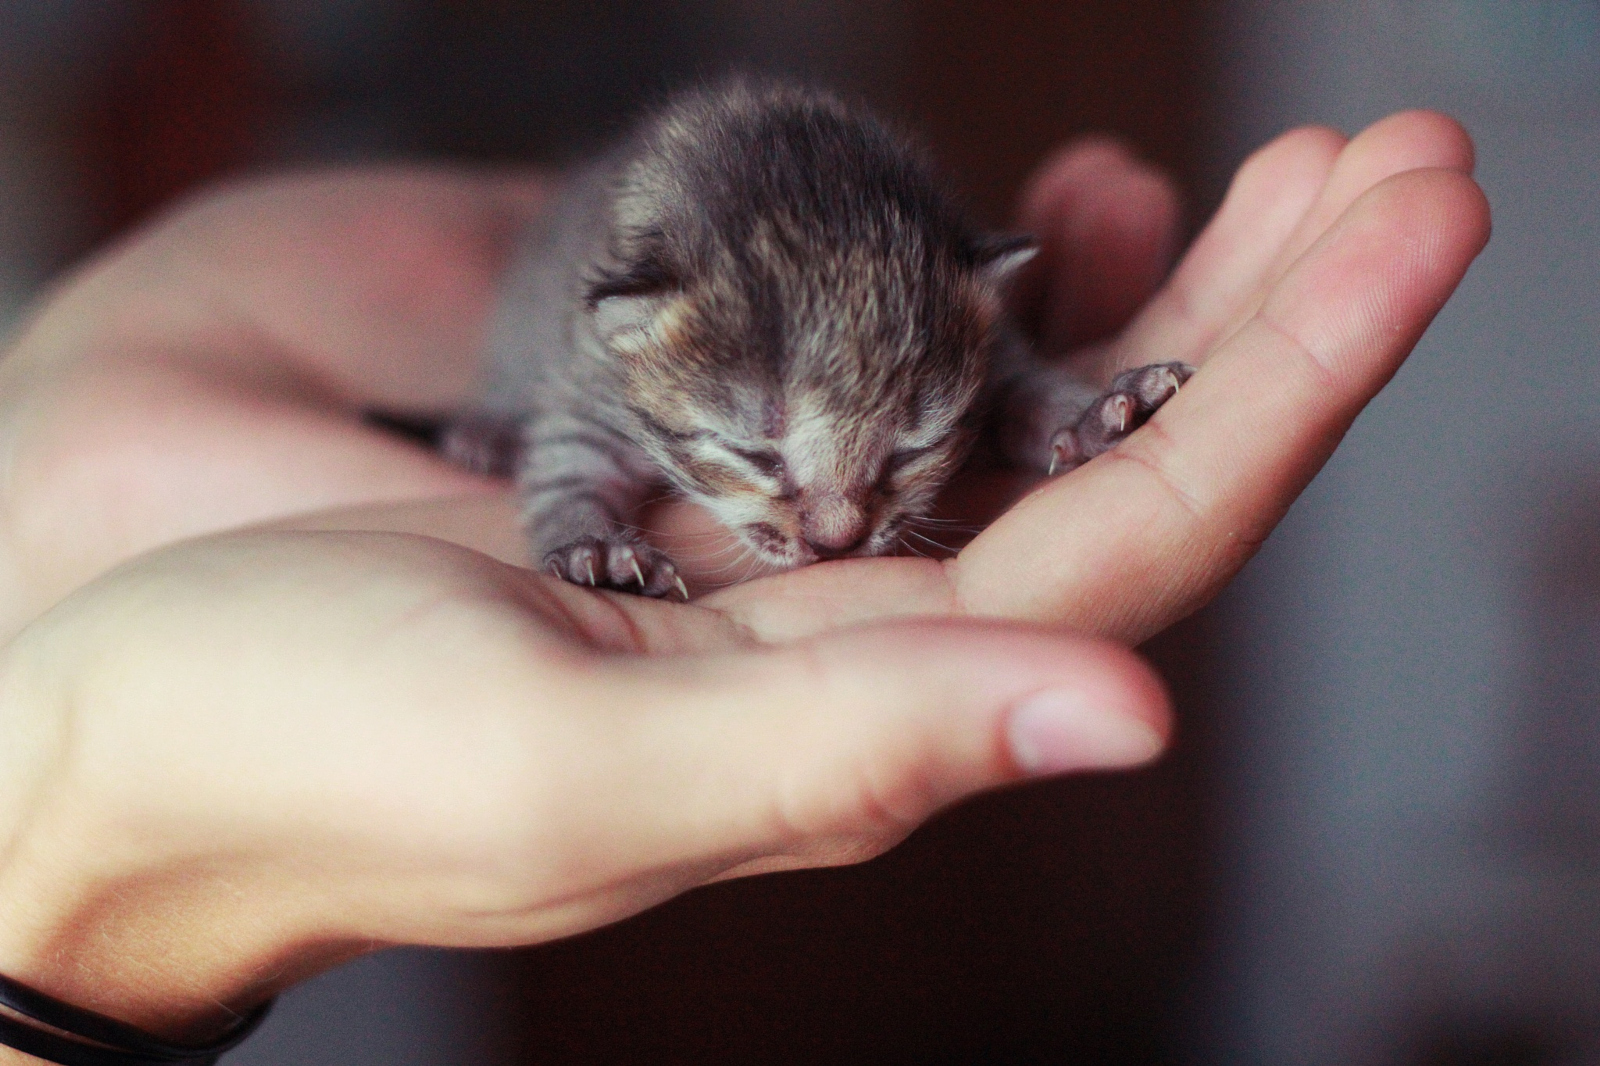 21 Purrfect Photos of Tiny Kittens That Fit In Your Palm